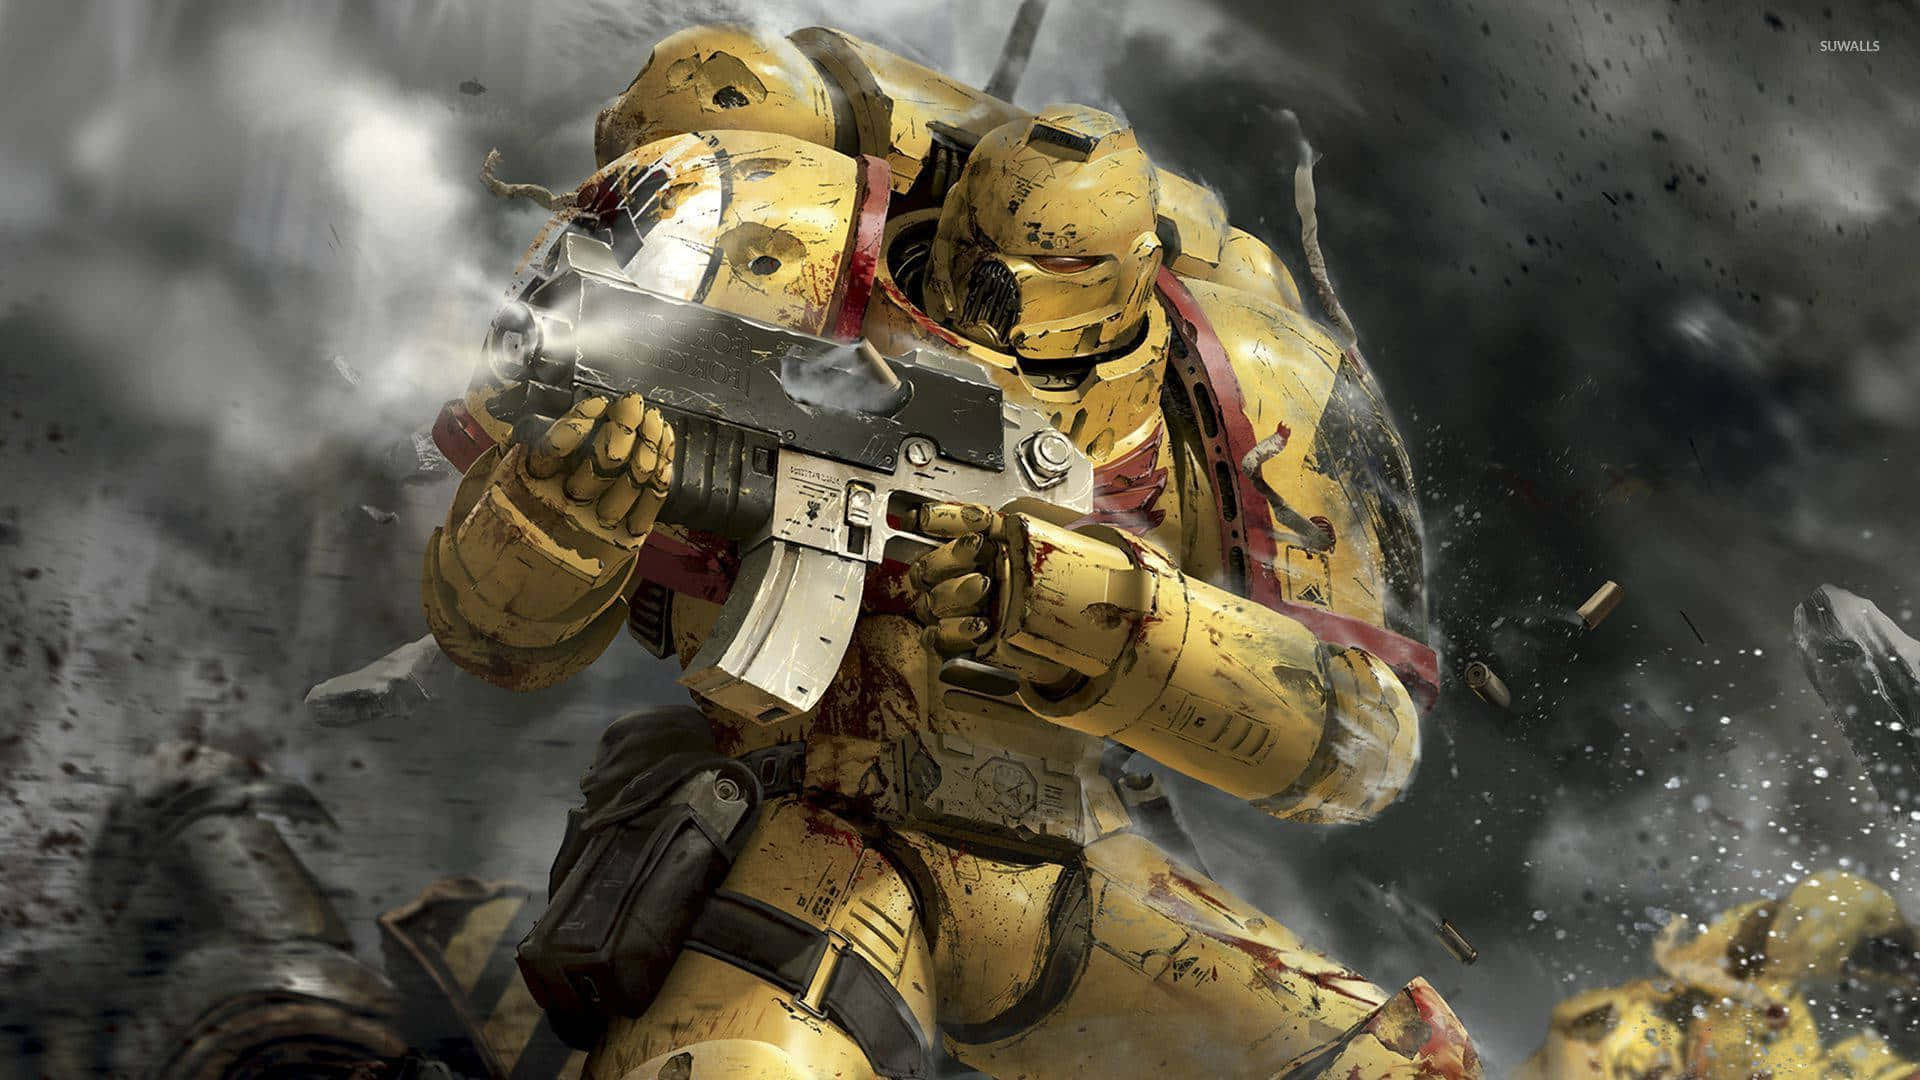 Imperial Fist Space Marine Wallpaper